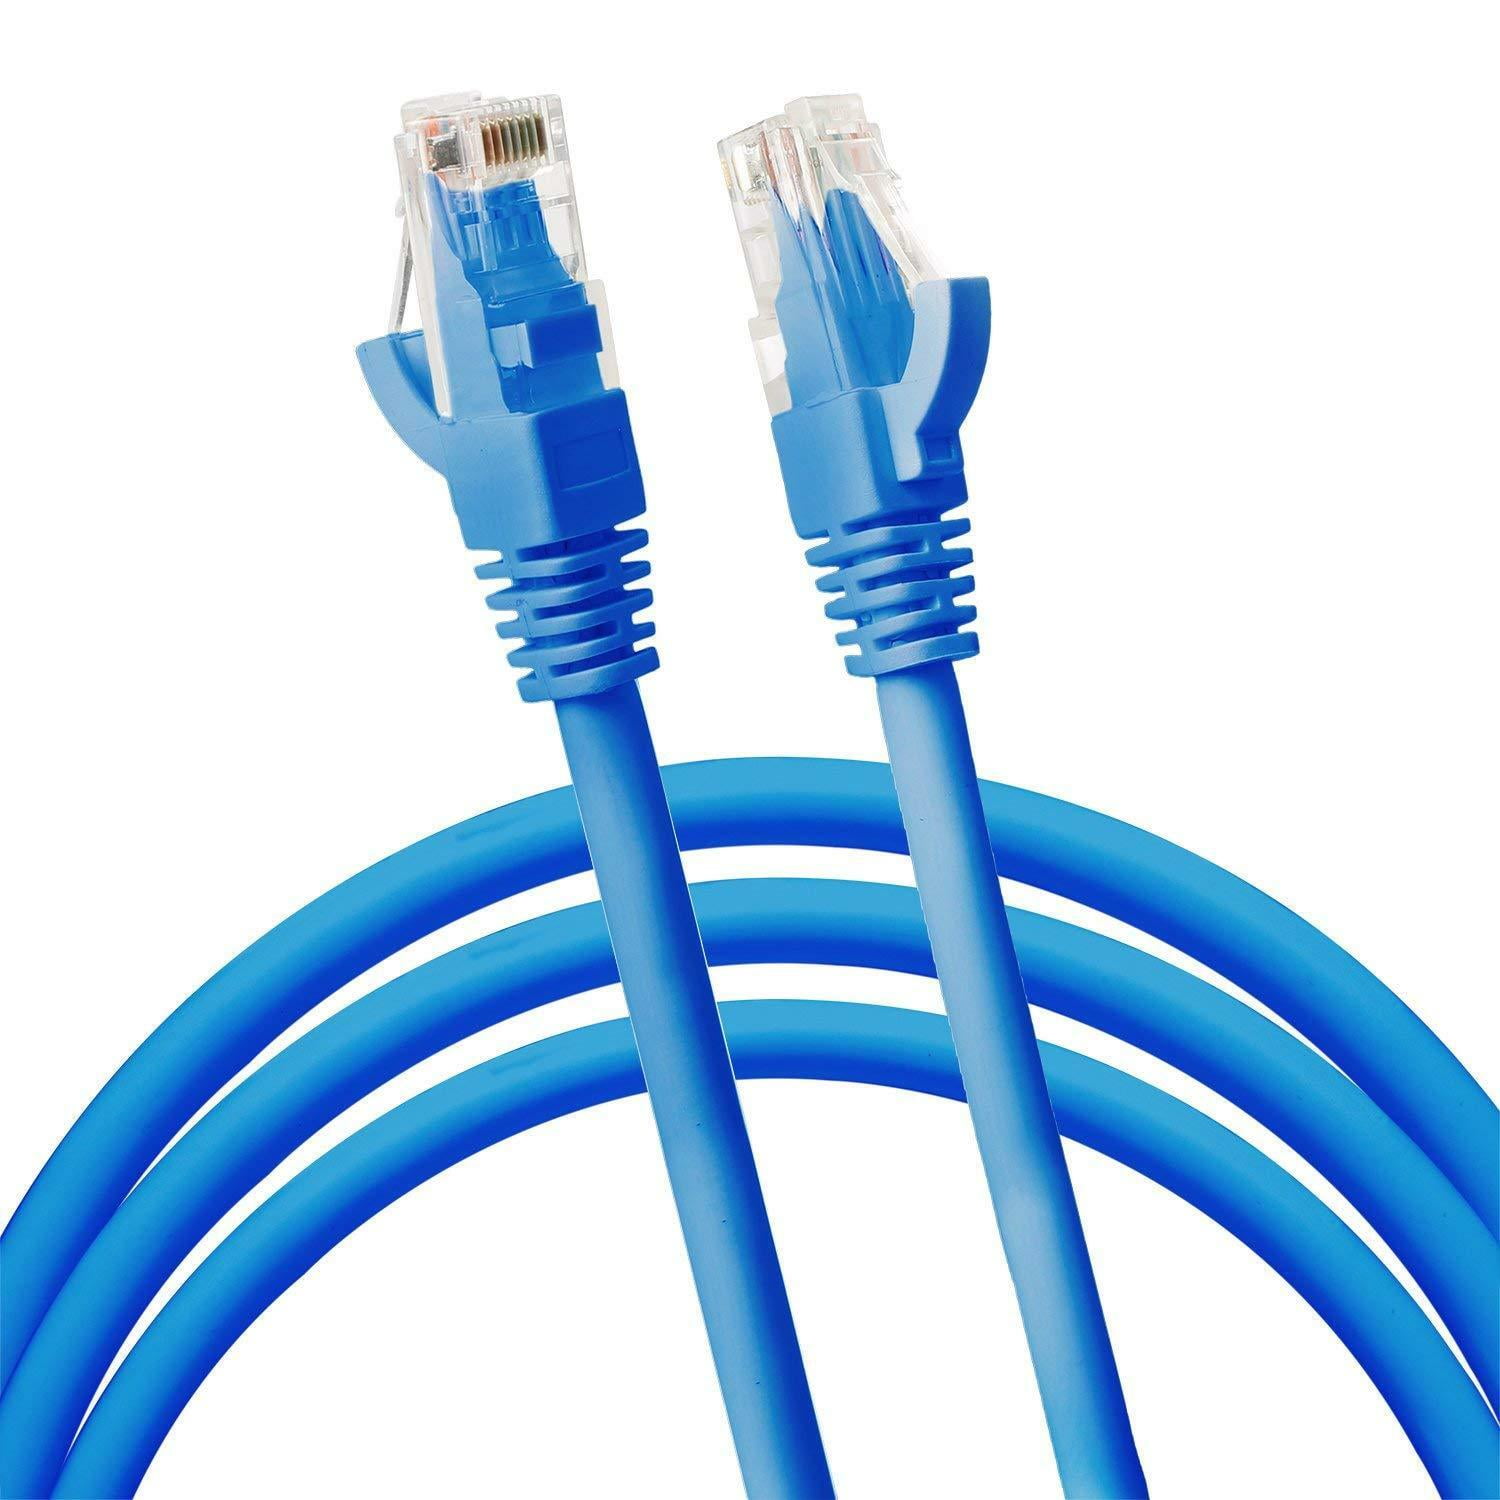 CableVantage Cat5 CAT5 Patch Cable Cord 500mhz Ethernet Internet Network Cable LAN RJ45 UTP for PC Computer PS4 Xbox One Modem Router RJ45 Computer Networking Cord Blue 150 Feet, Blue 